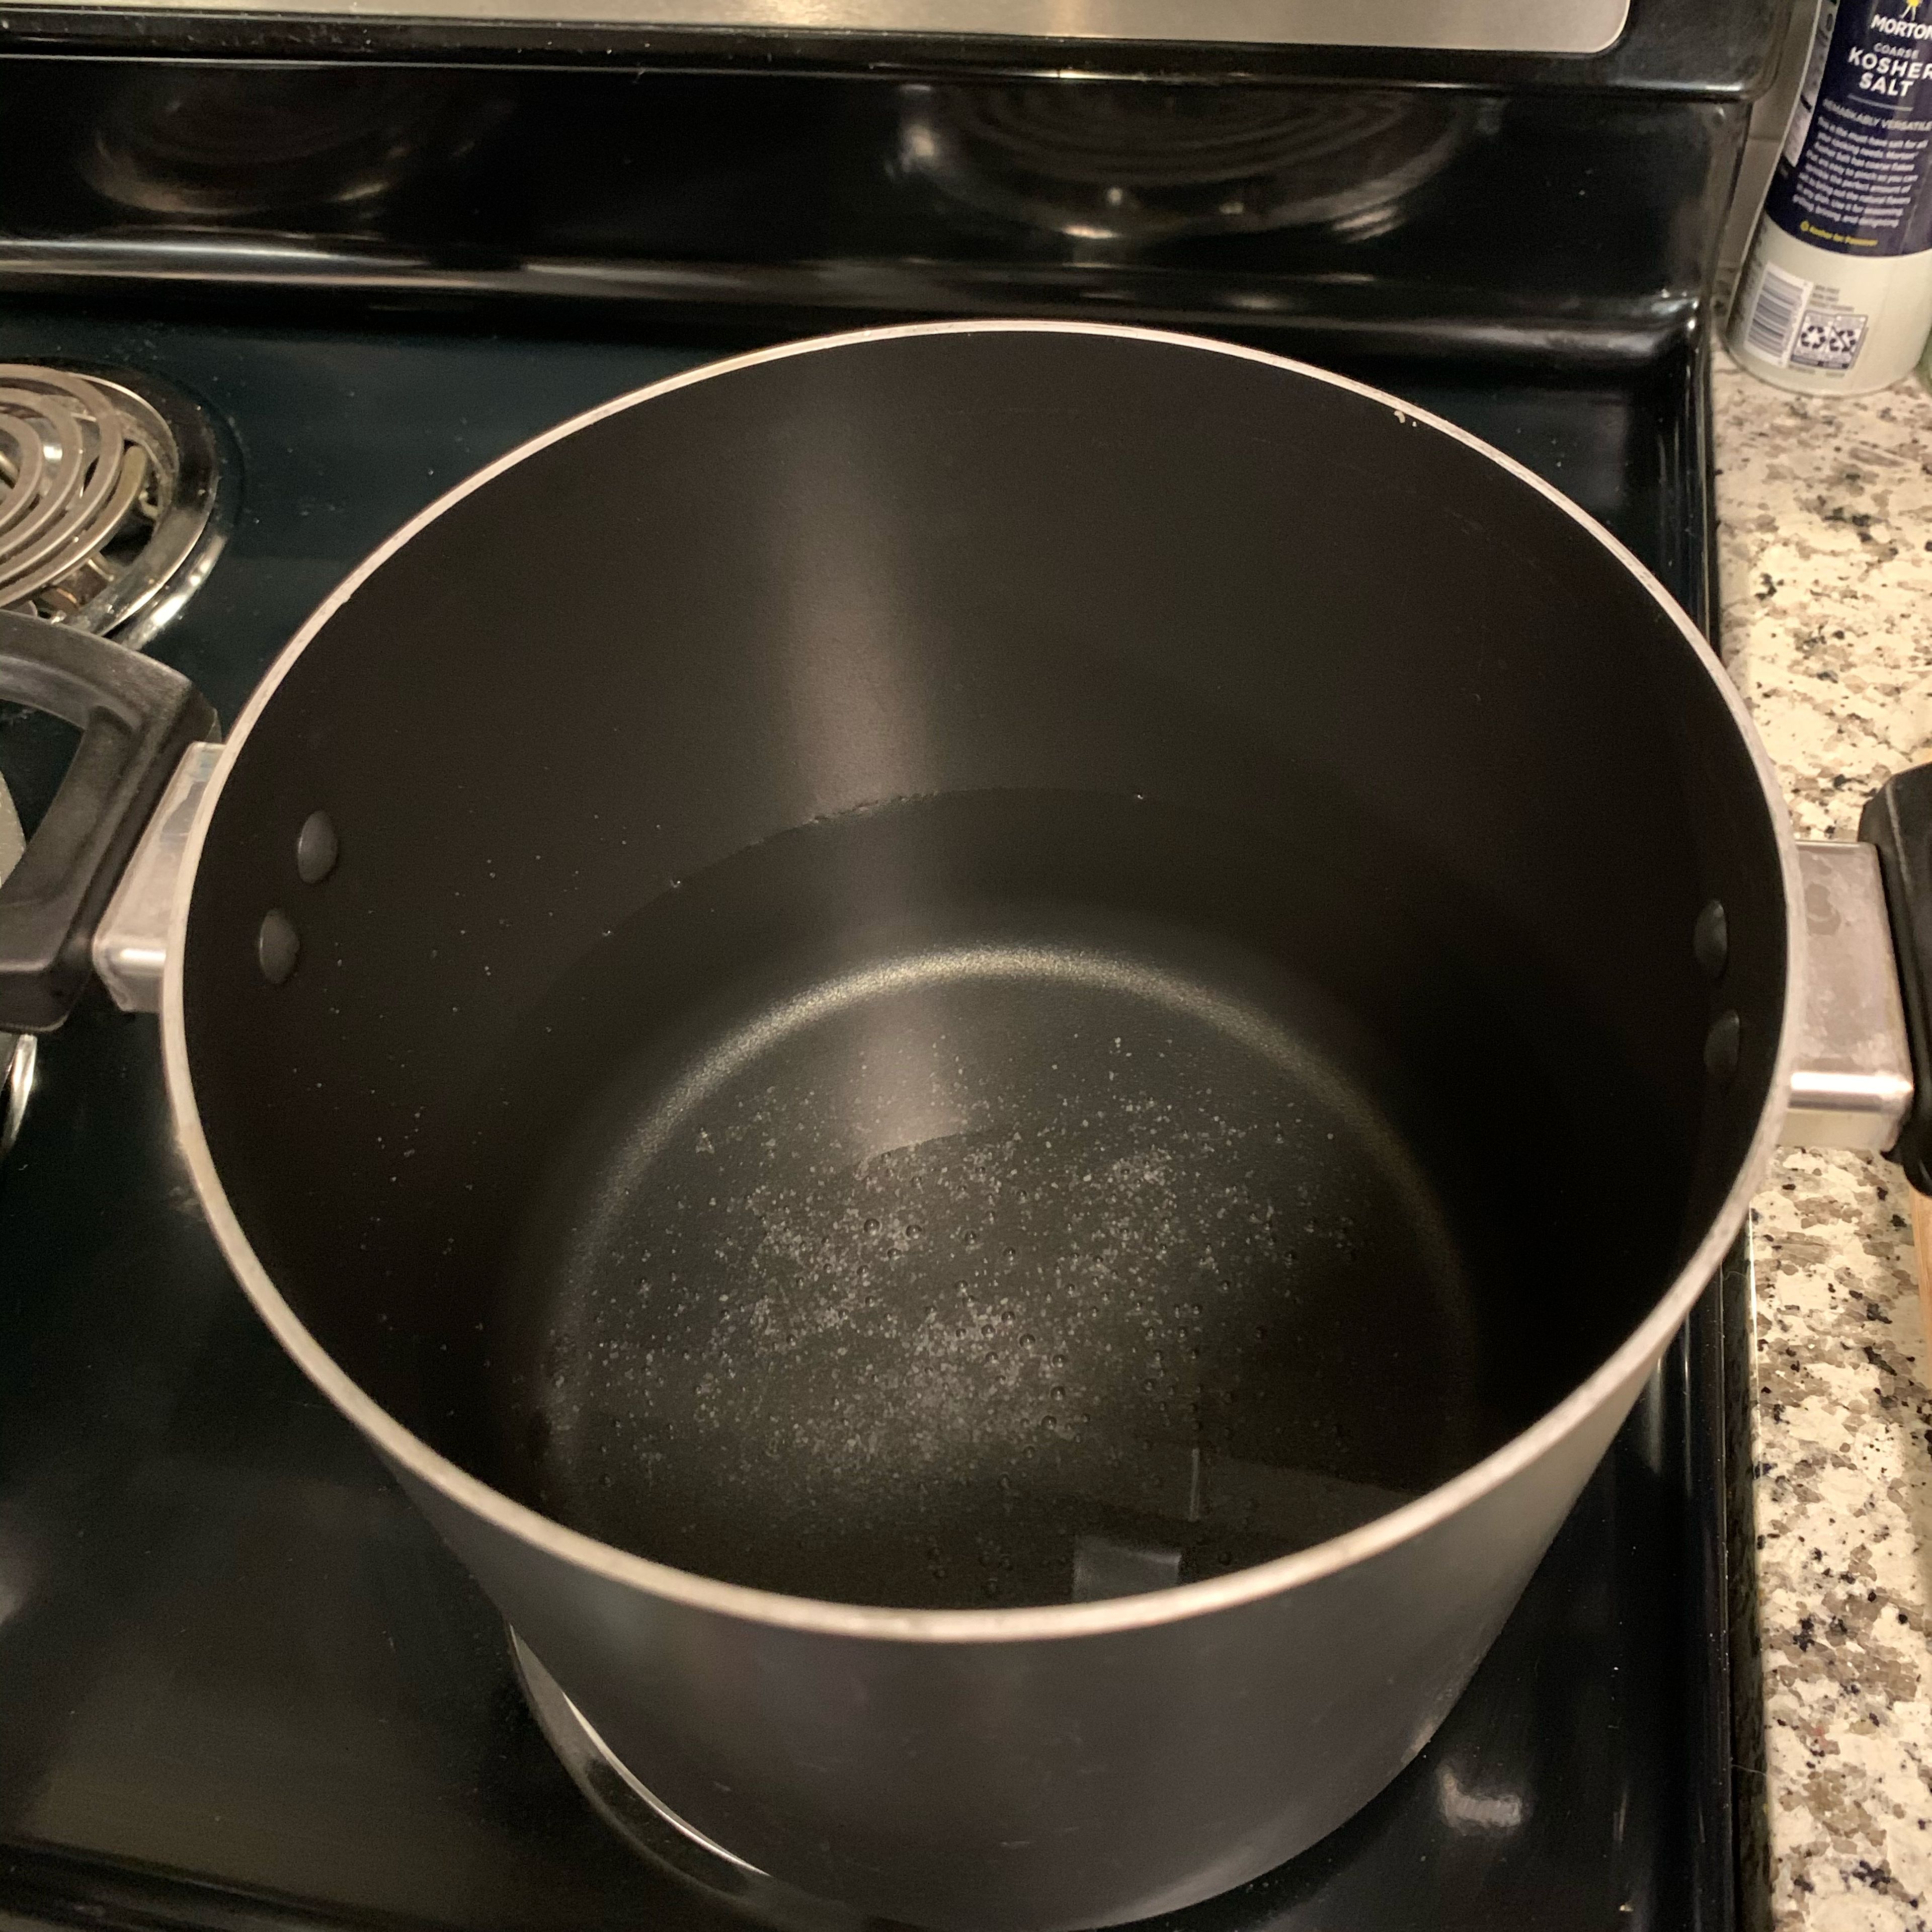 Start by bringing water to a boil. Add salt to the water.